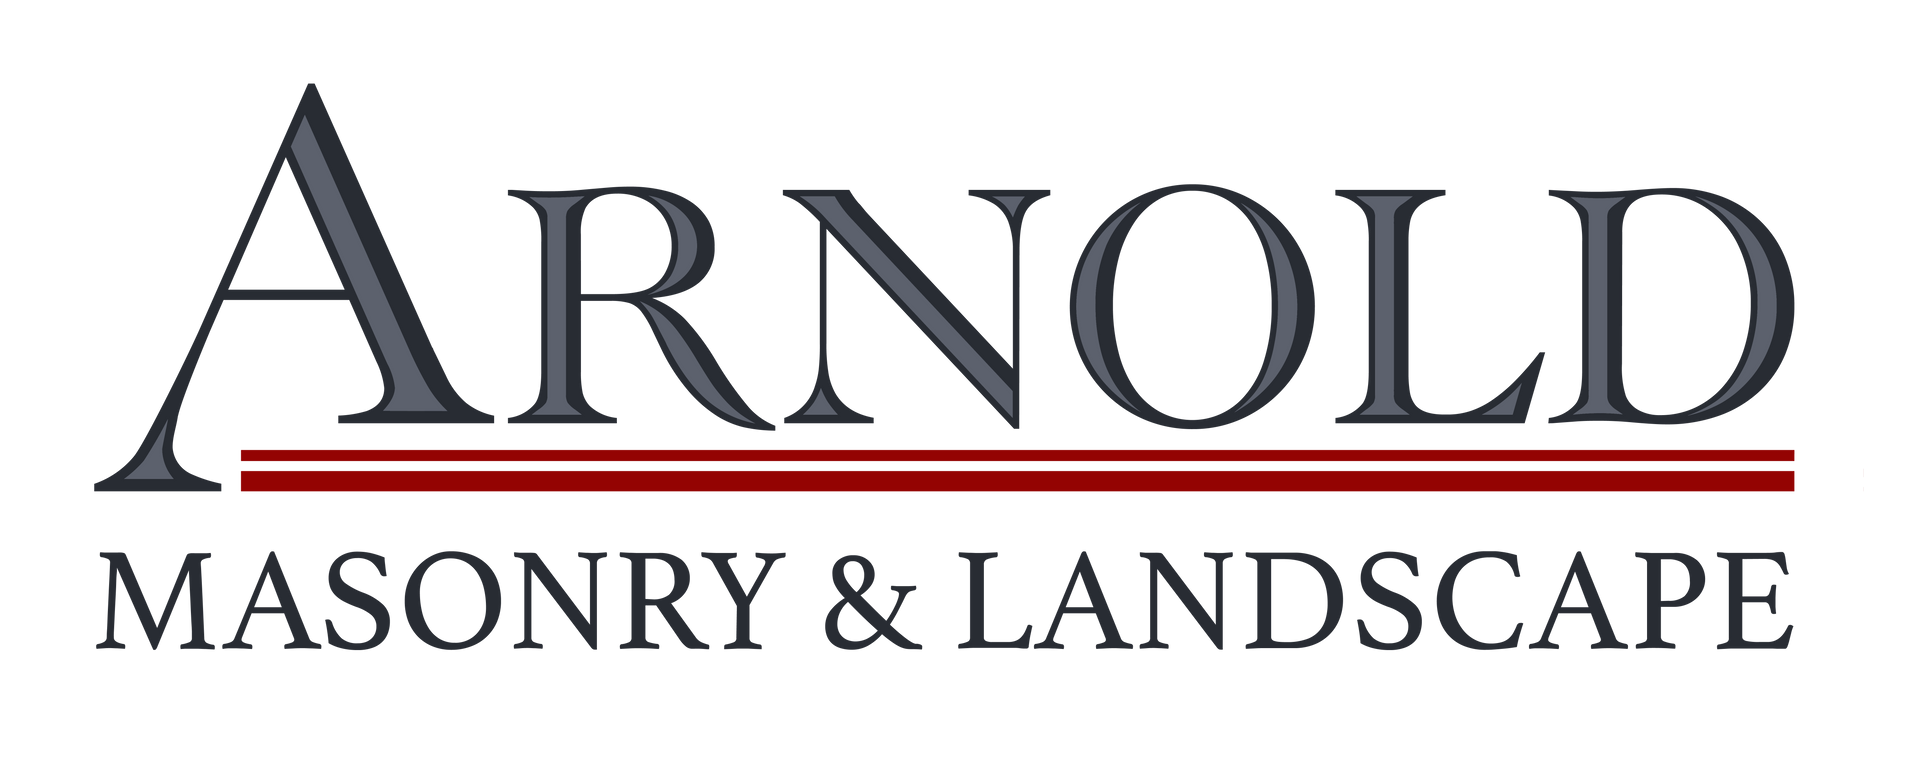 The logo for arnold masonry and landscape is shown on a white background.